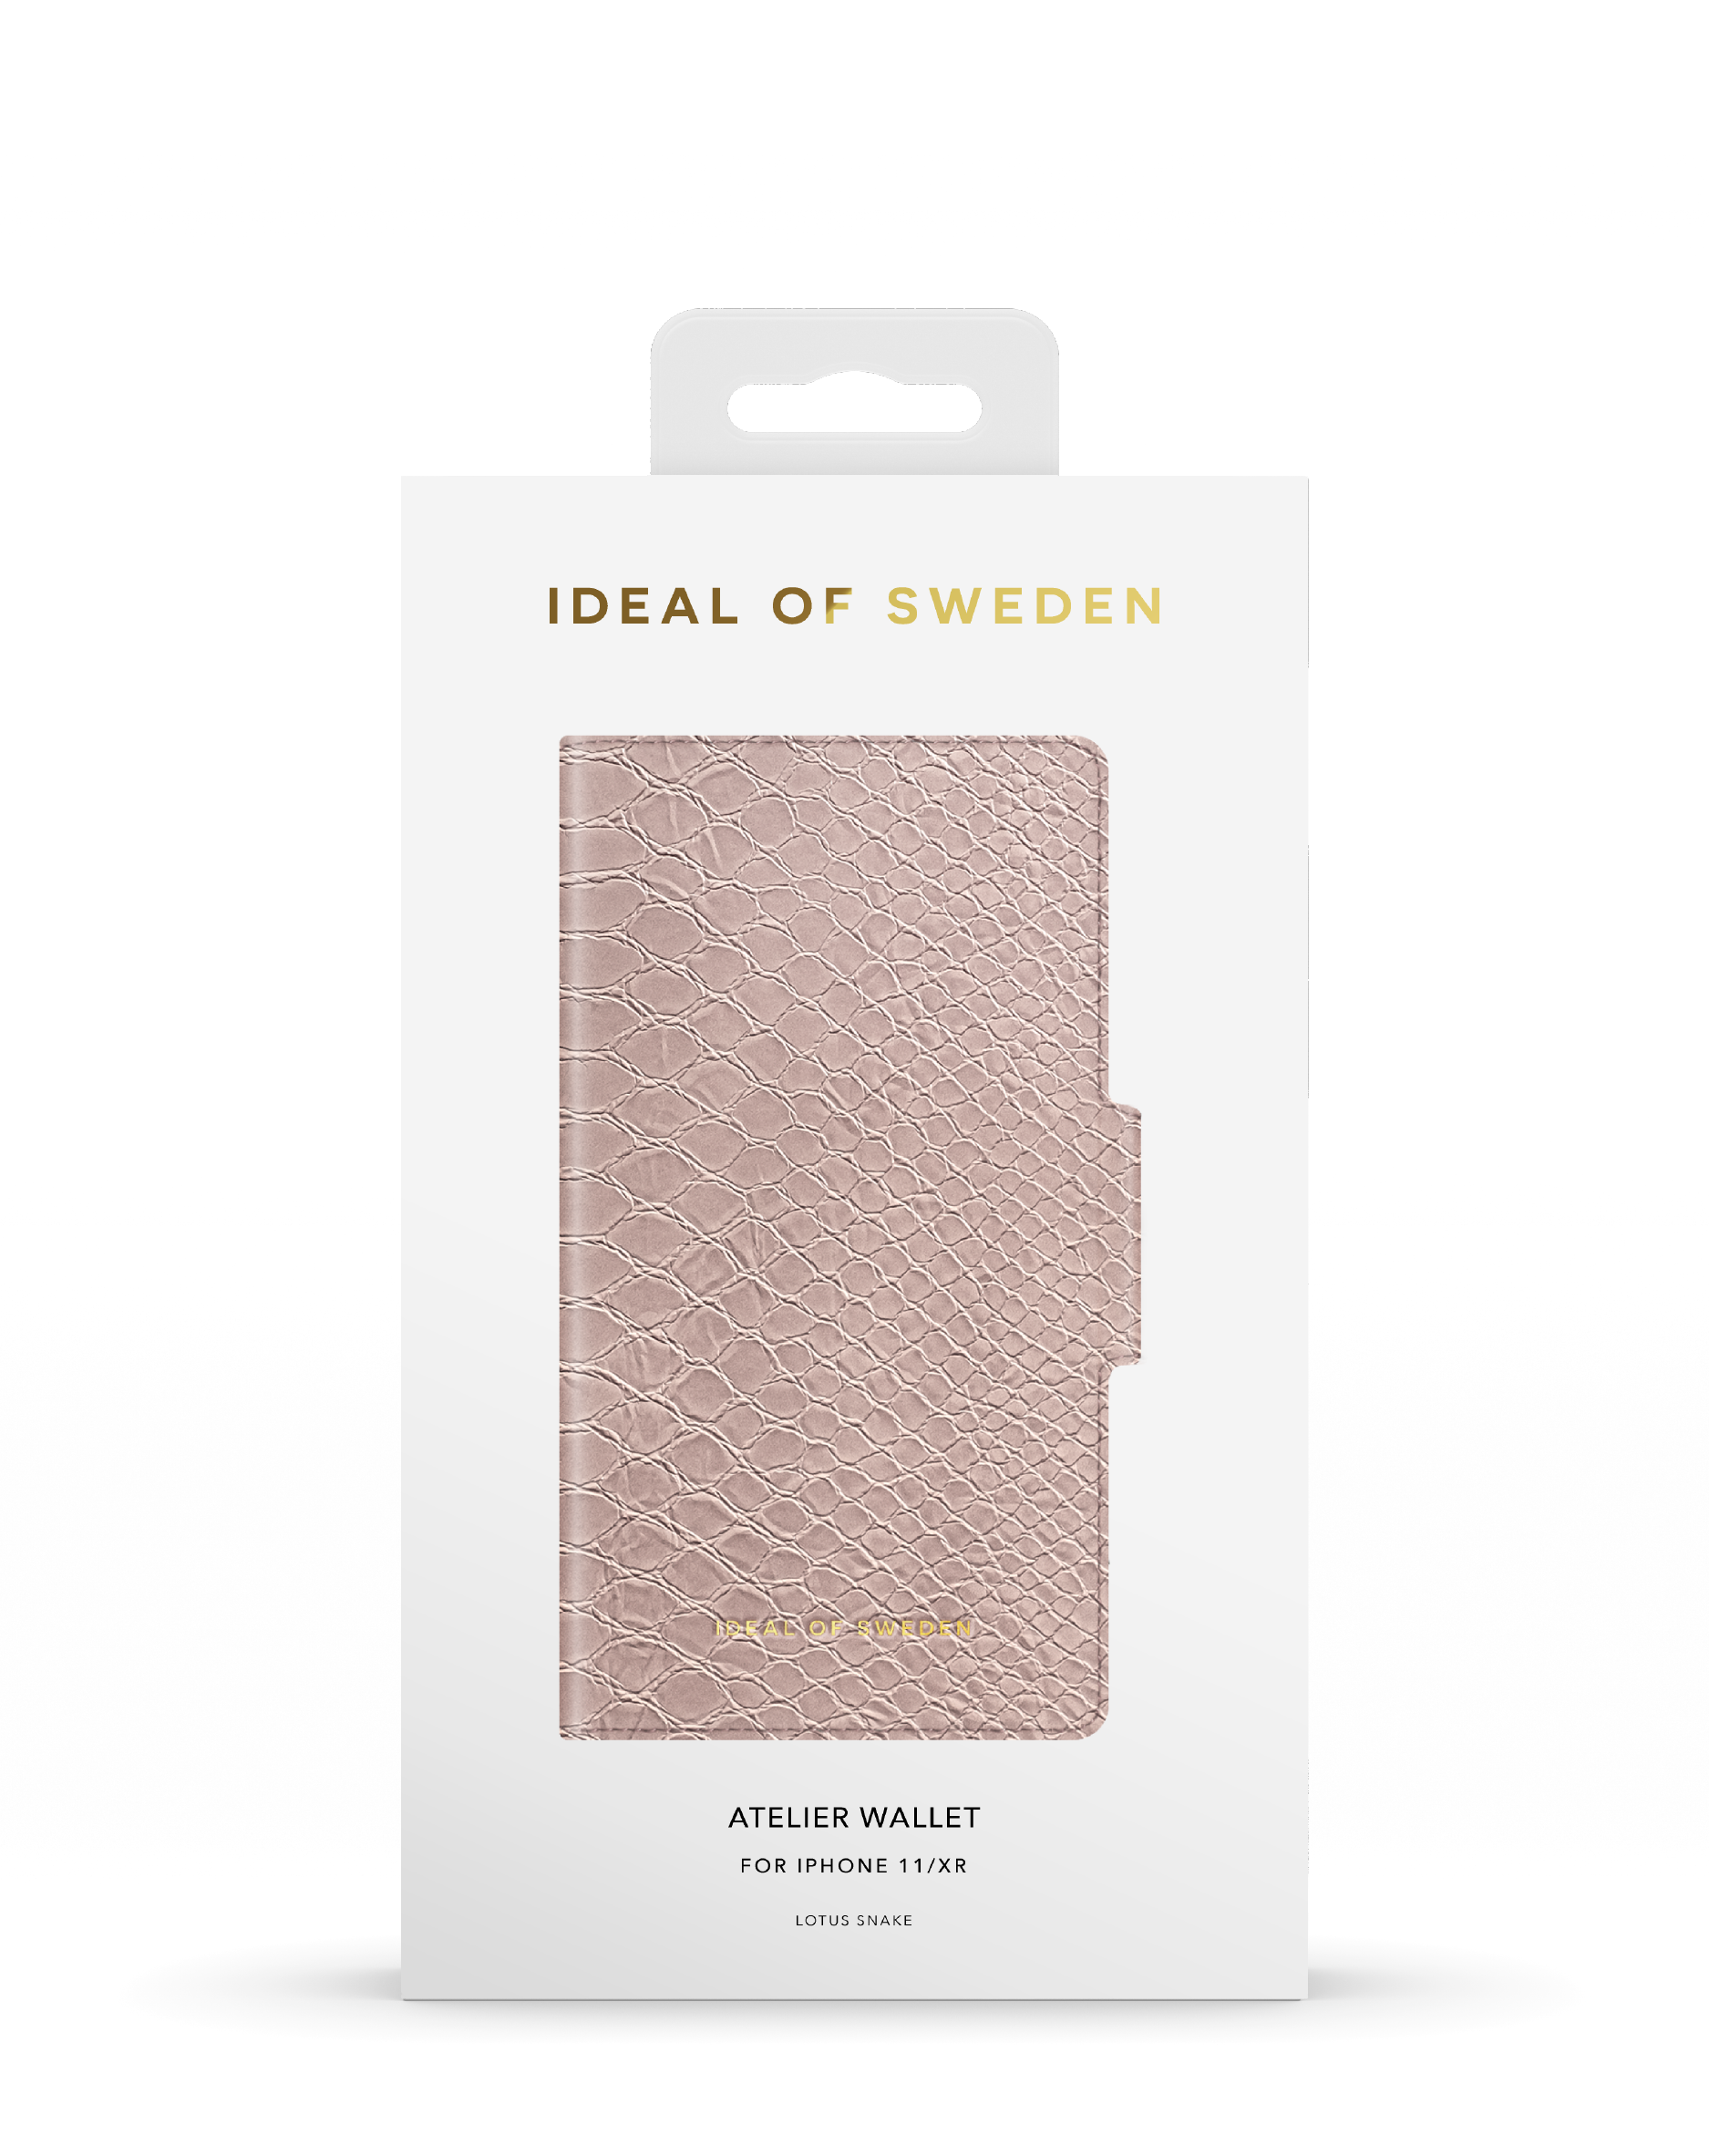 IDEAL OF SWEDEN IDAW-I1961-234, XR, Lotus / iPhone Apple, Bookcover, Snake 11 iPhone